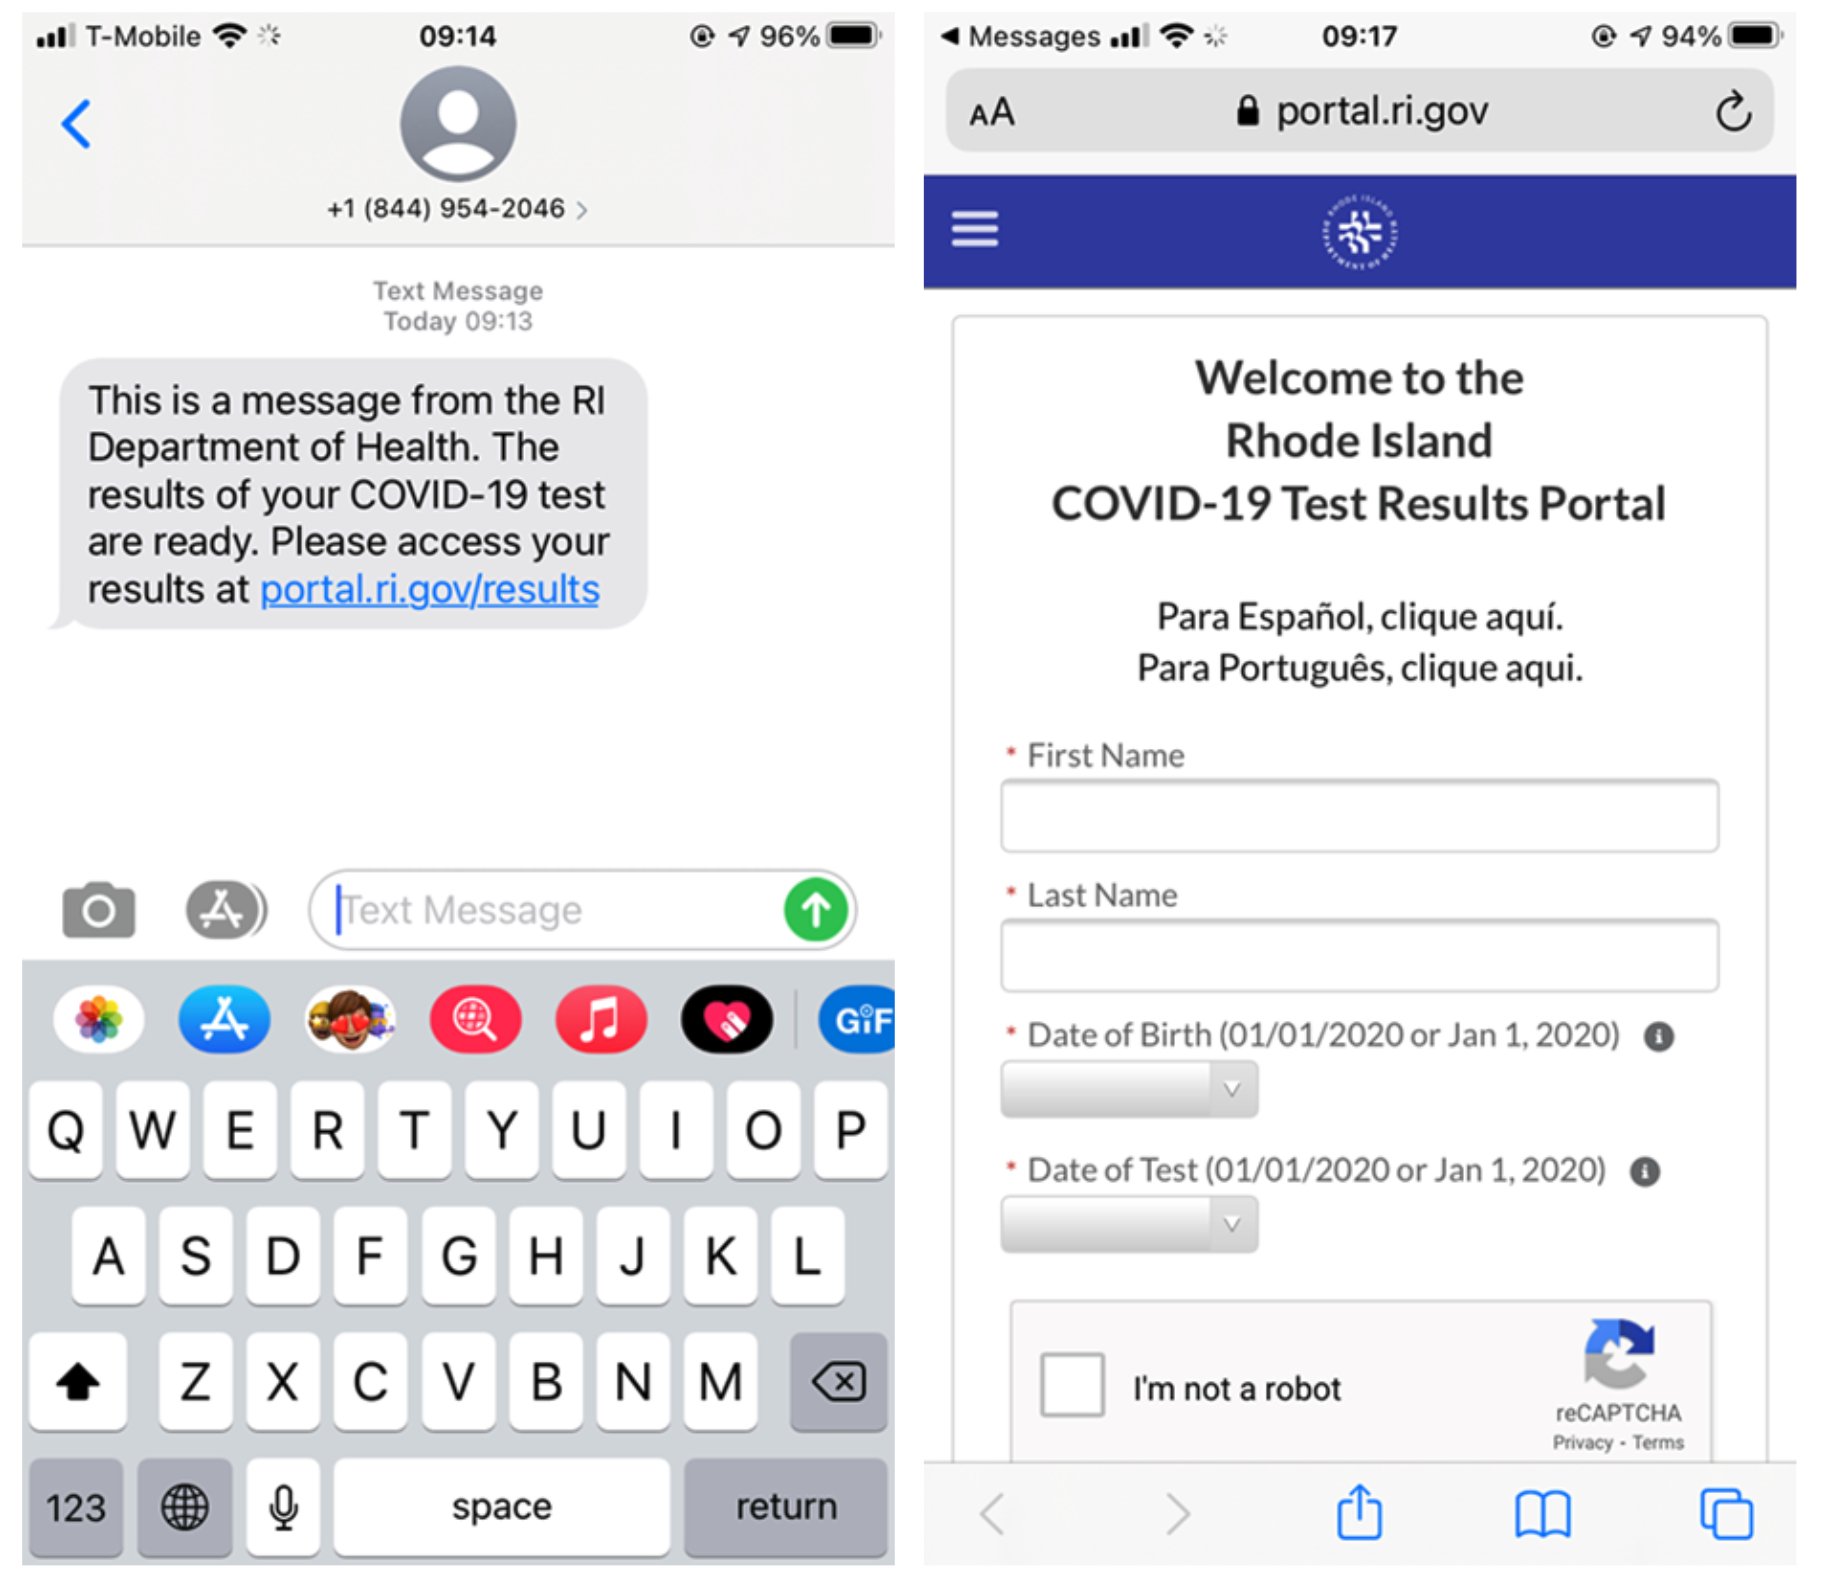 RIDOH text messages: results of your COVID-19 test are ready